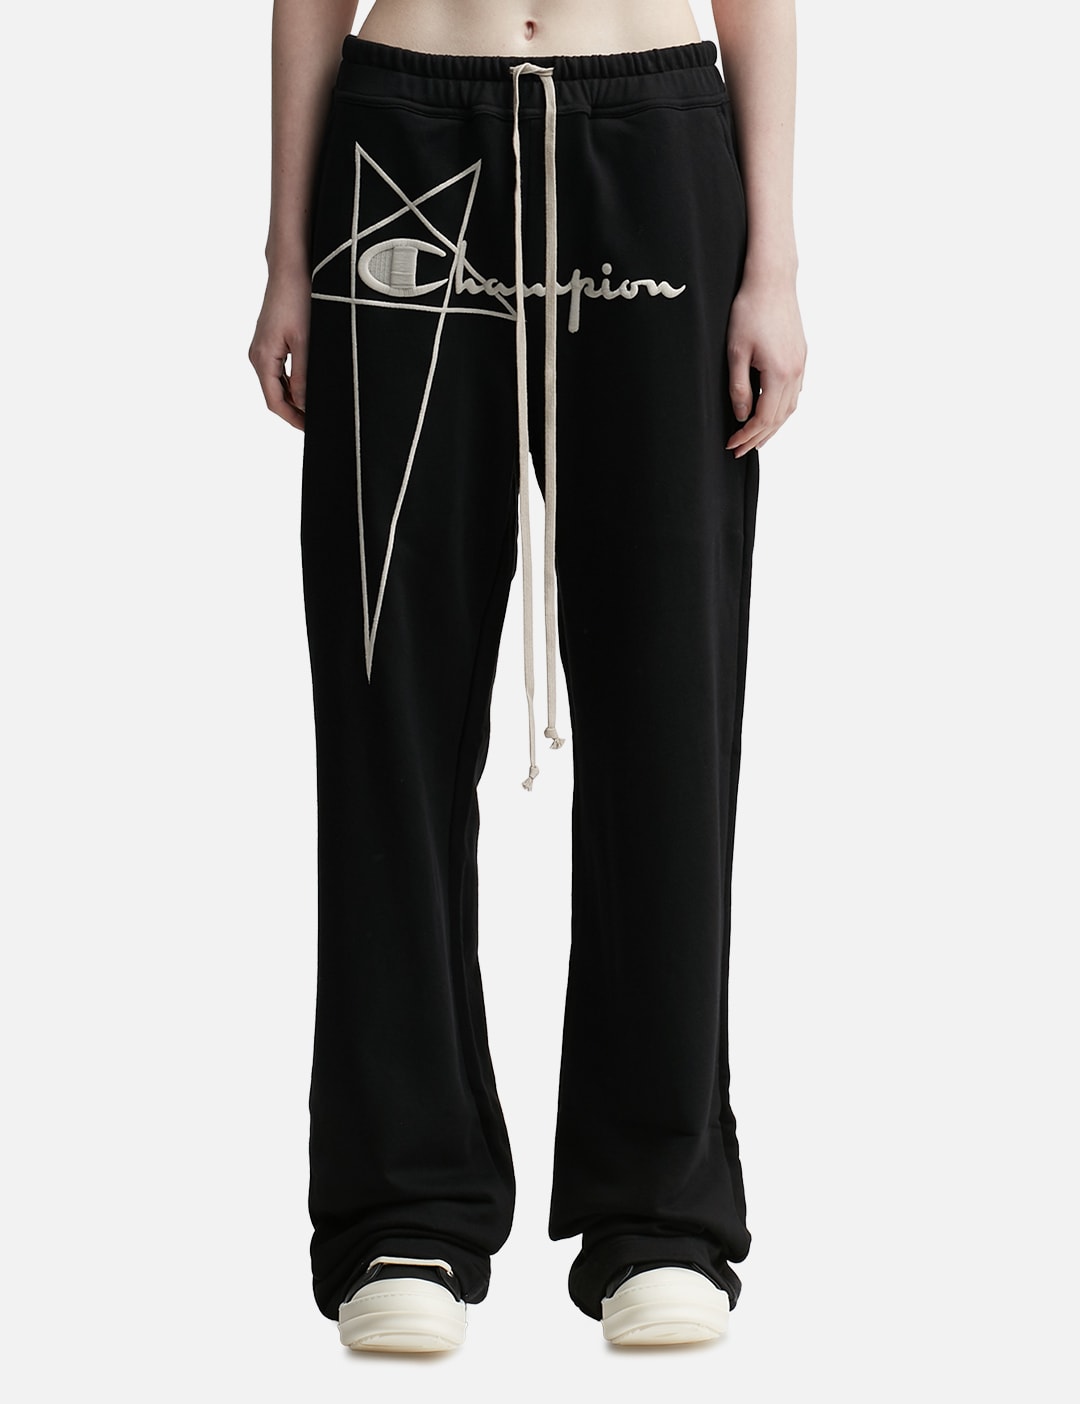 Entire Studios - Heavy Sweatpants  HBX - Globally Curated Fashion and  Lifestyle by Hypebeast